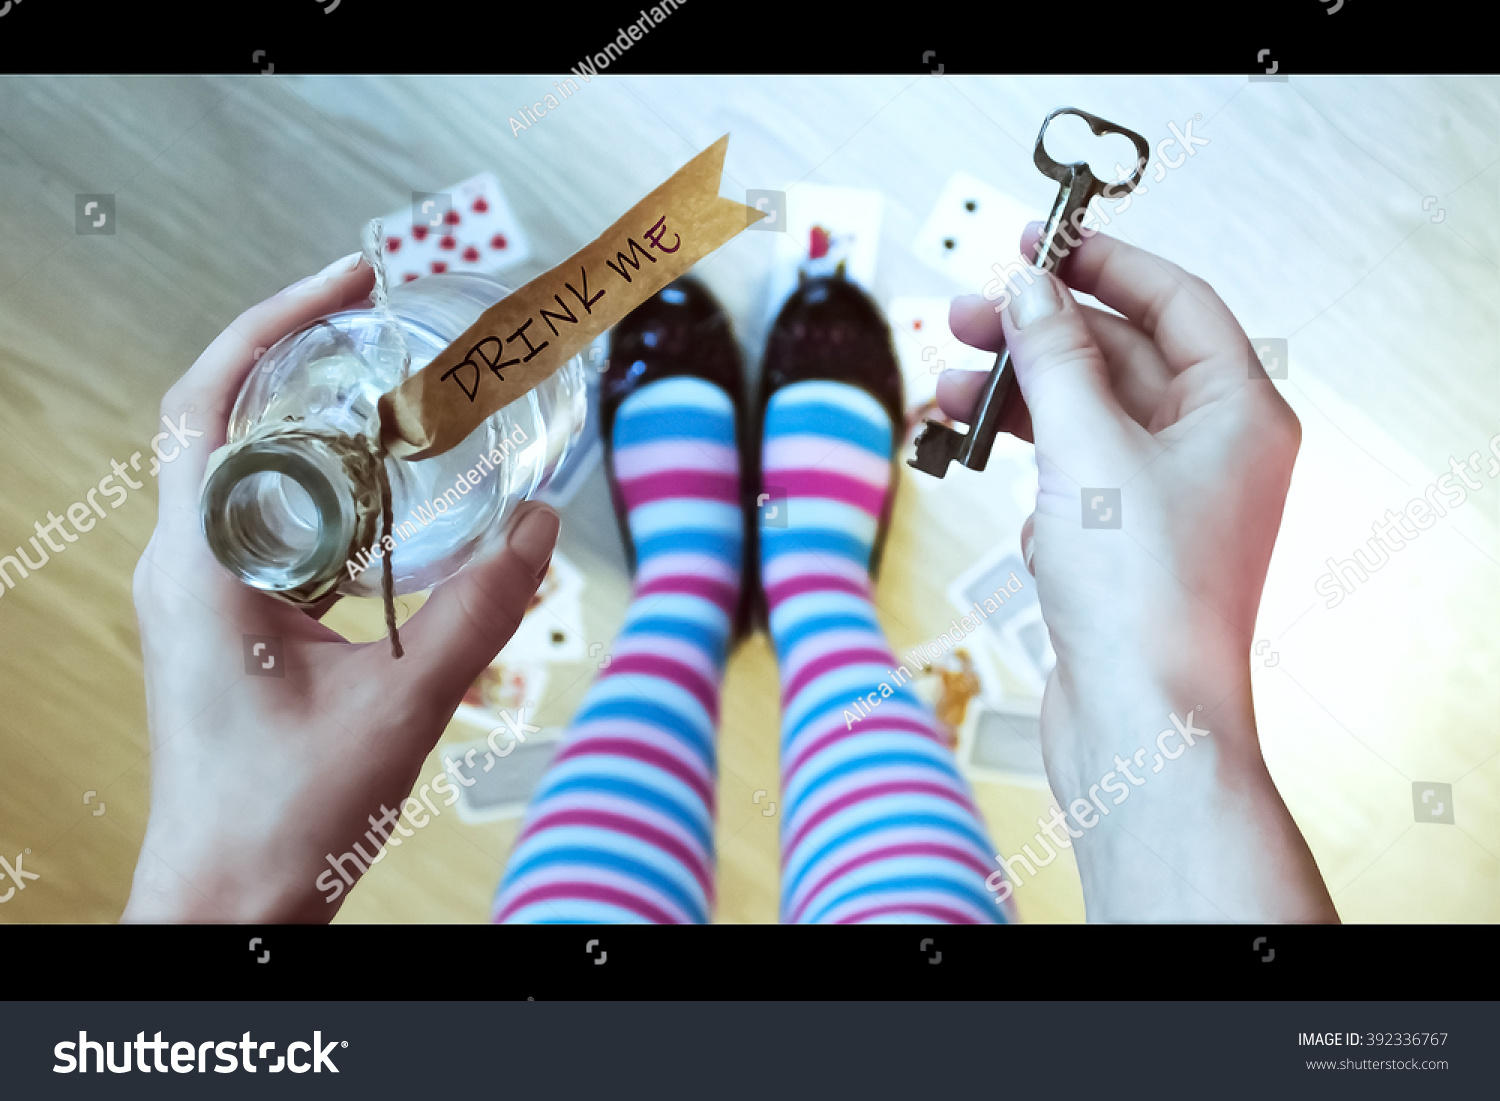 Alice in wonderland. Background. Key and potion in hands against a floor #392336767